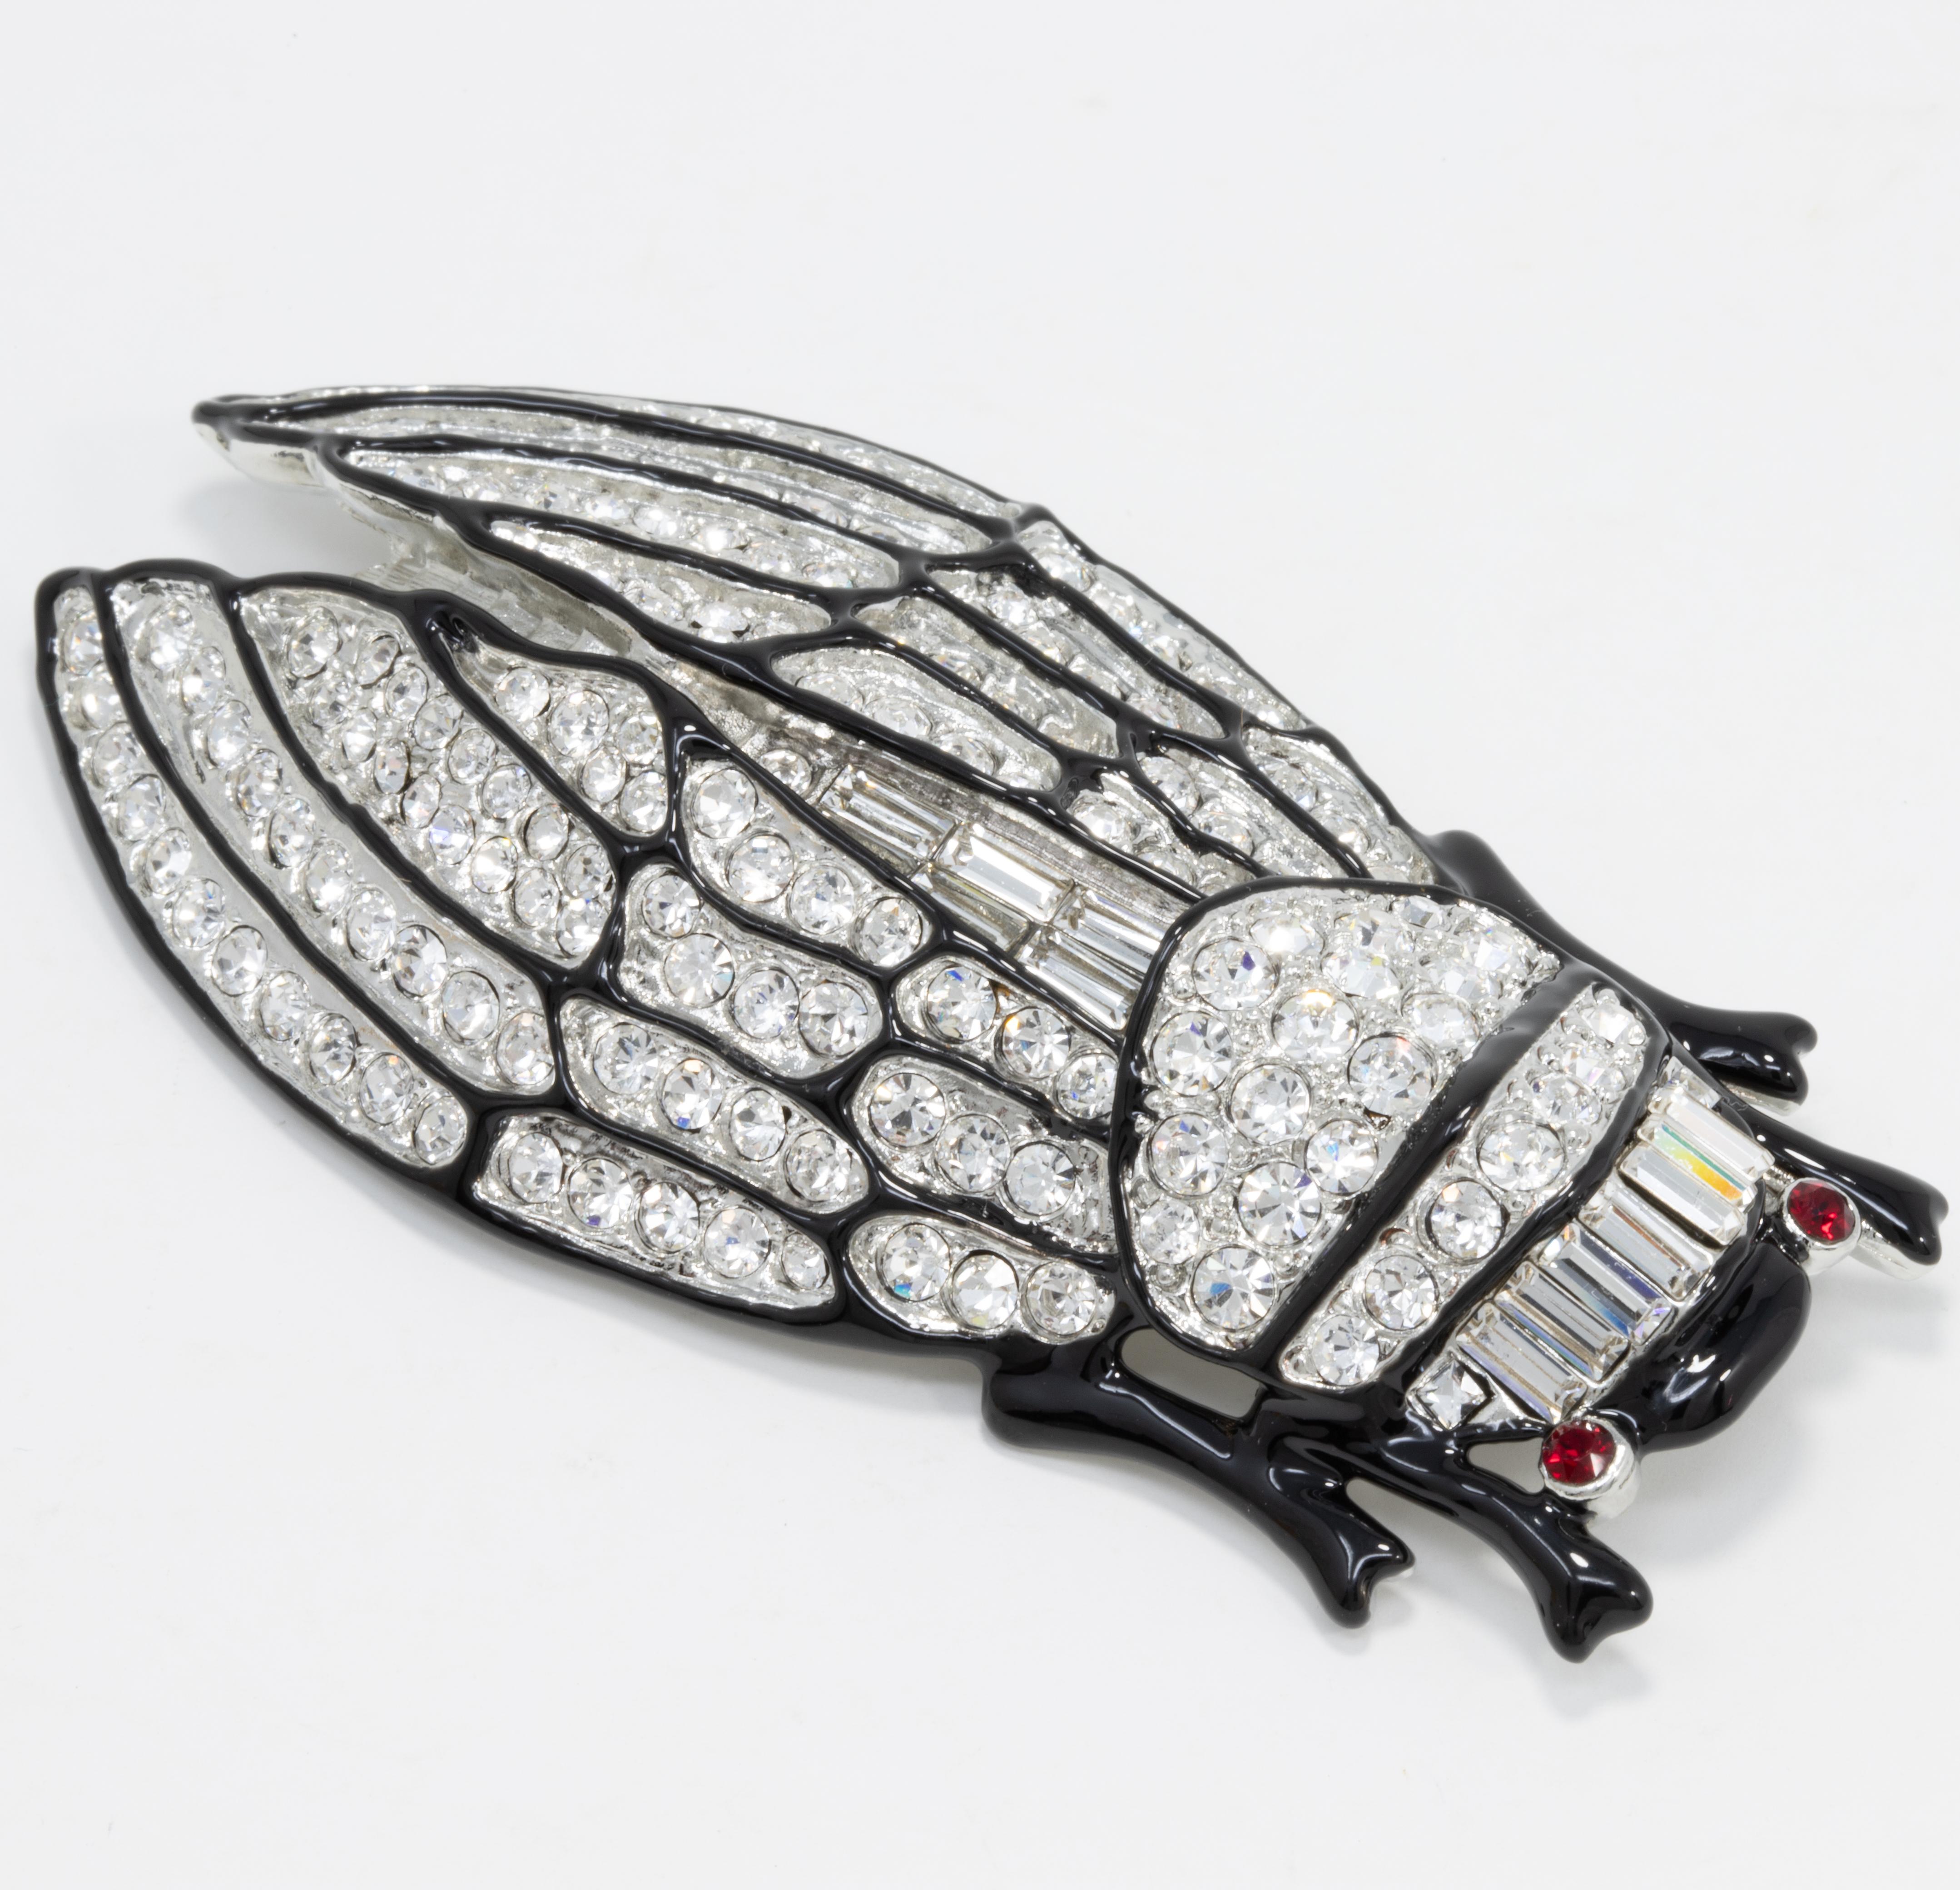 An elegant cicada critter decorated with glowing crystals and black enamel. A perfect touch of glamour!

Marks / hallmarks / etc: Kenneth Lane